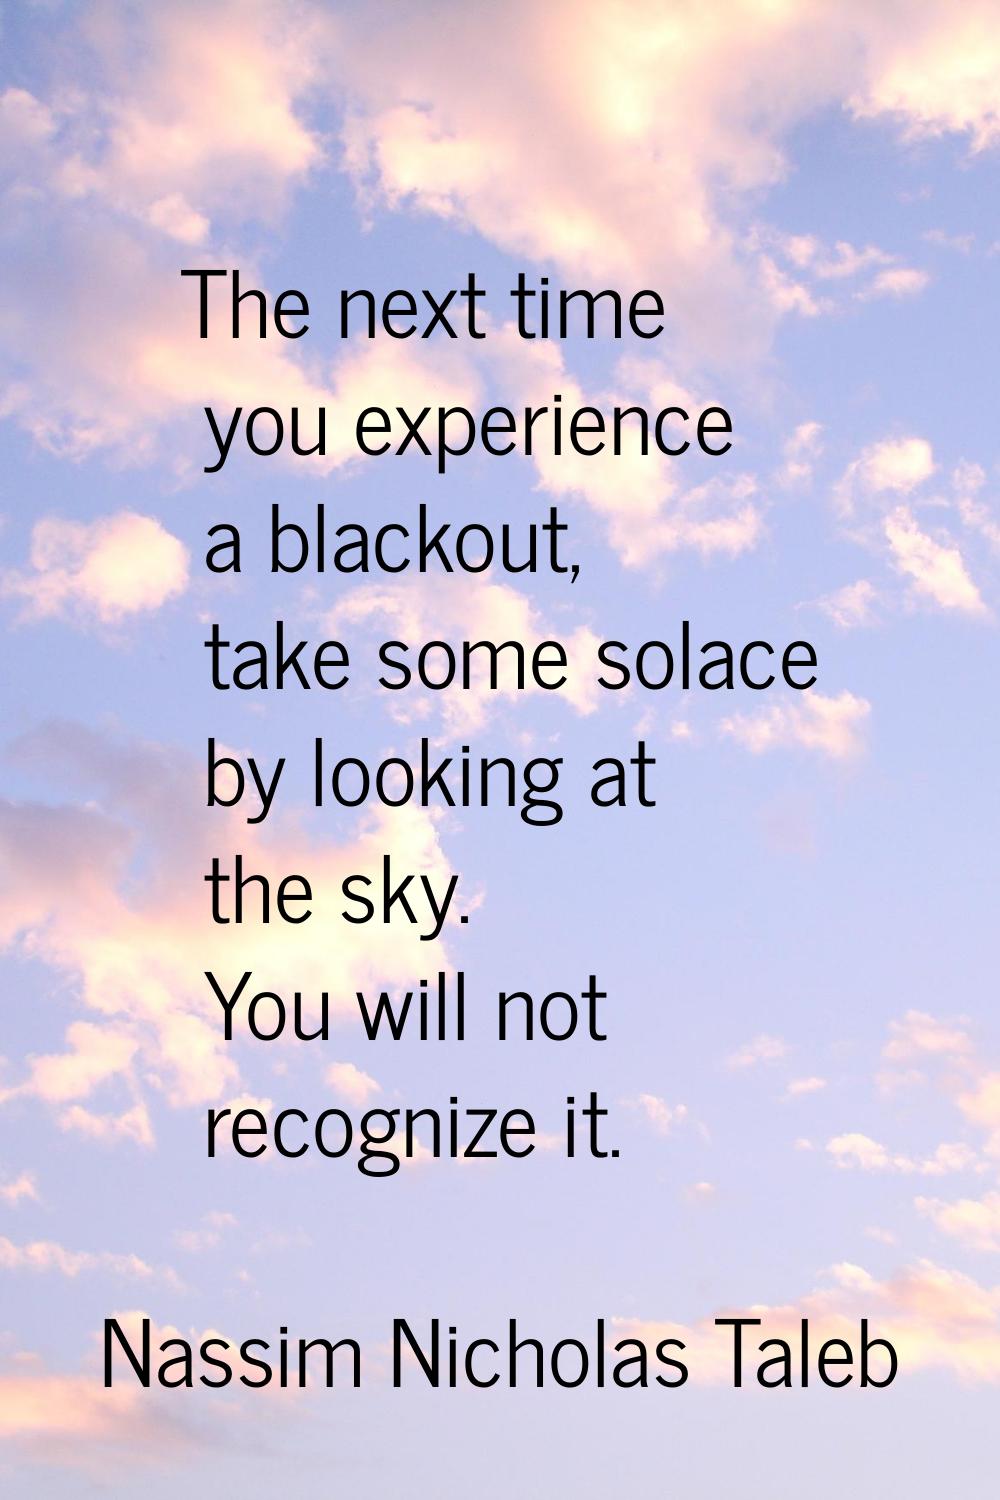 The next time you experience a blackout, take some solace by looking at the sky. You will not recog